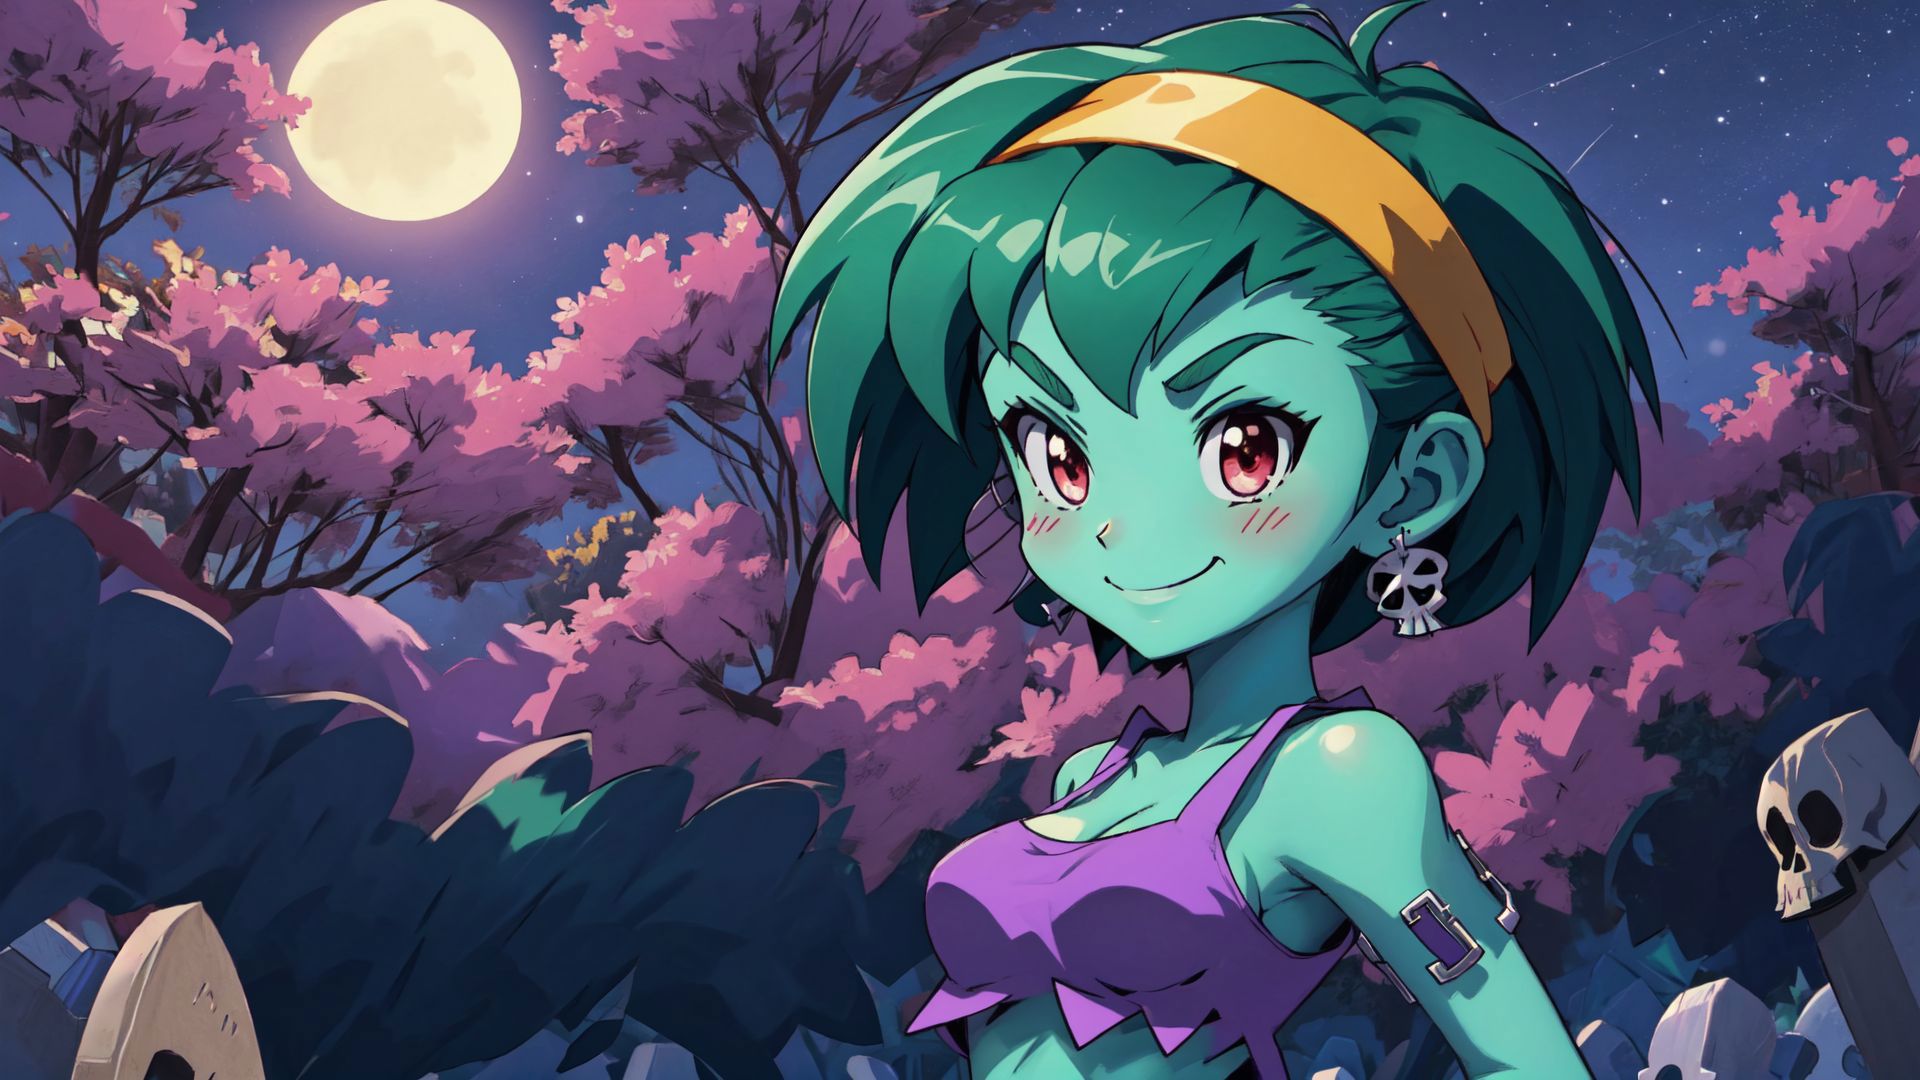 WallpapersWidecom  High Resolution Desktop Wallpapers tagged with shantae   Page 1